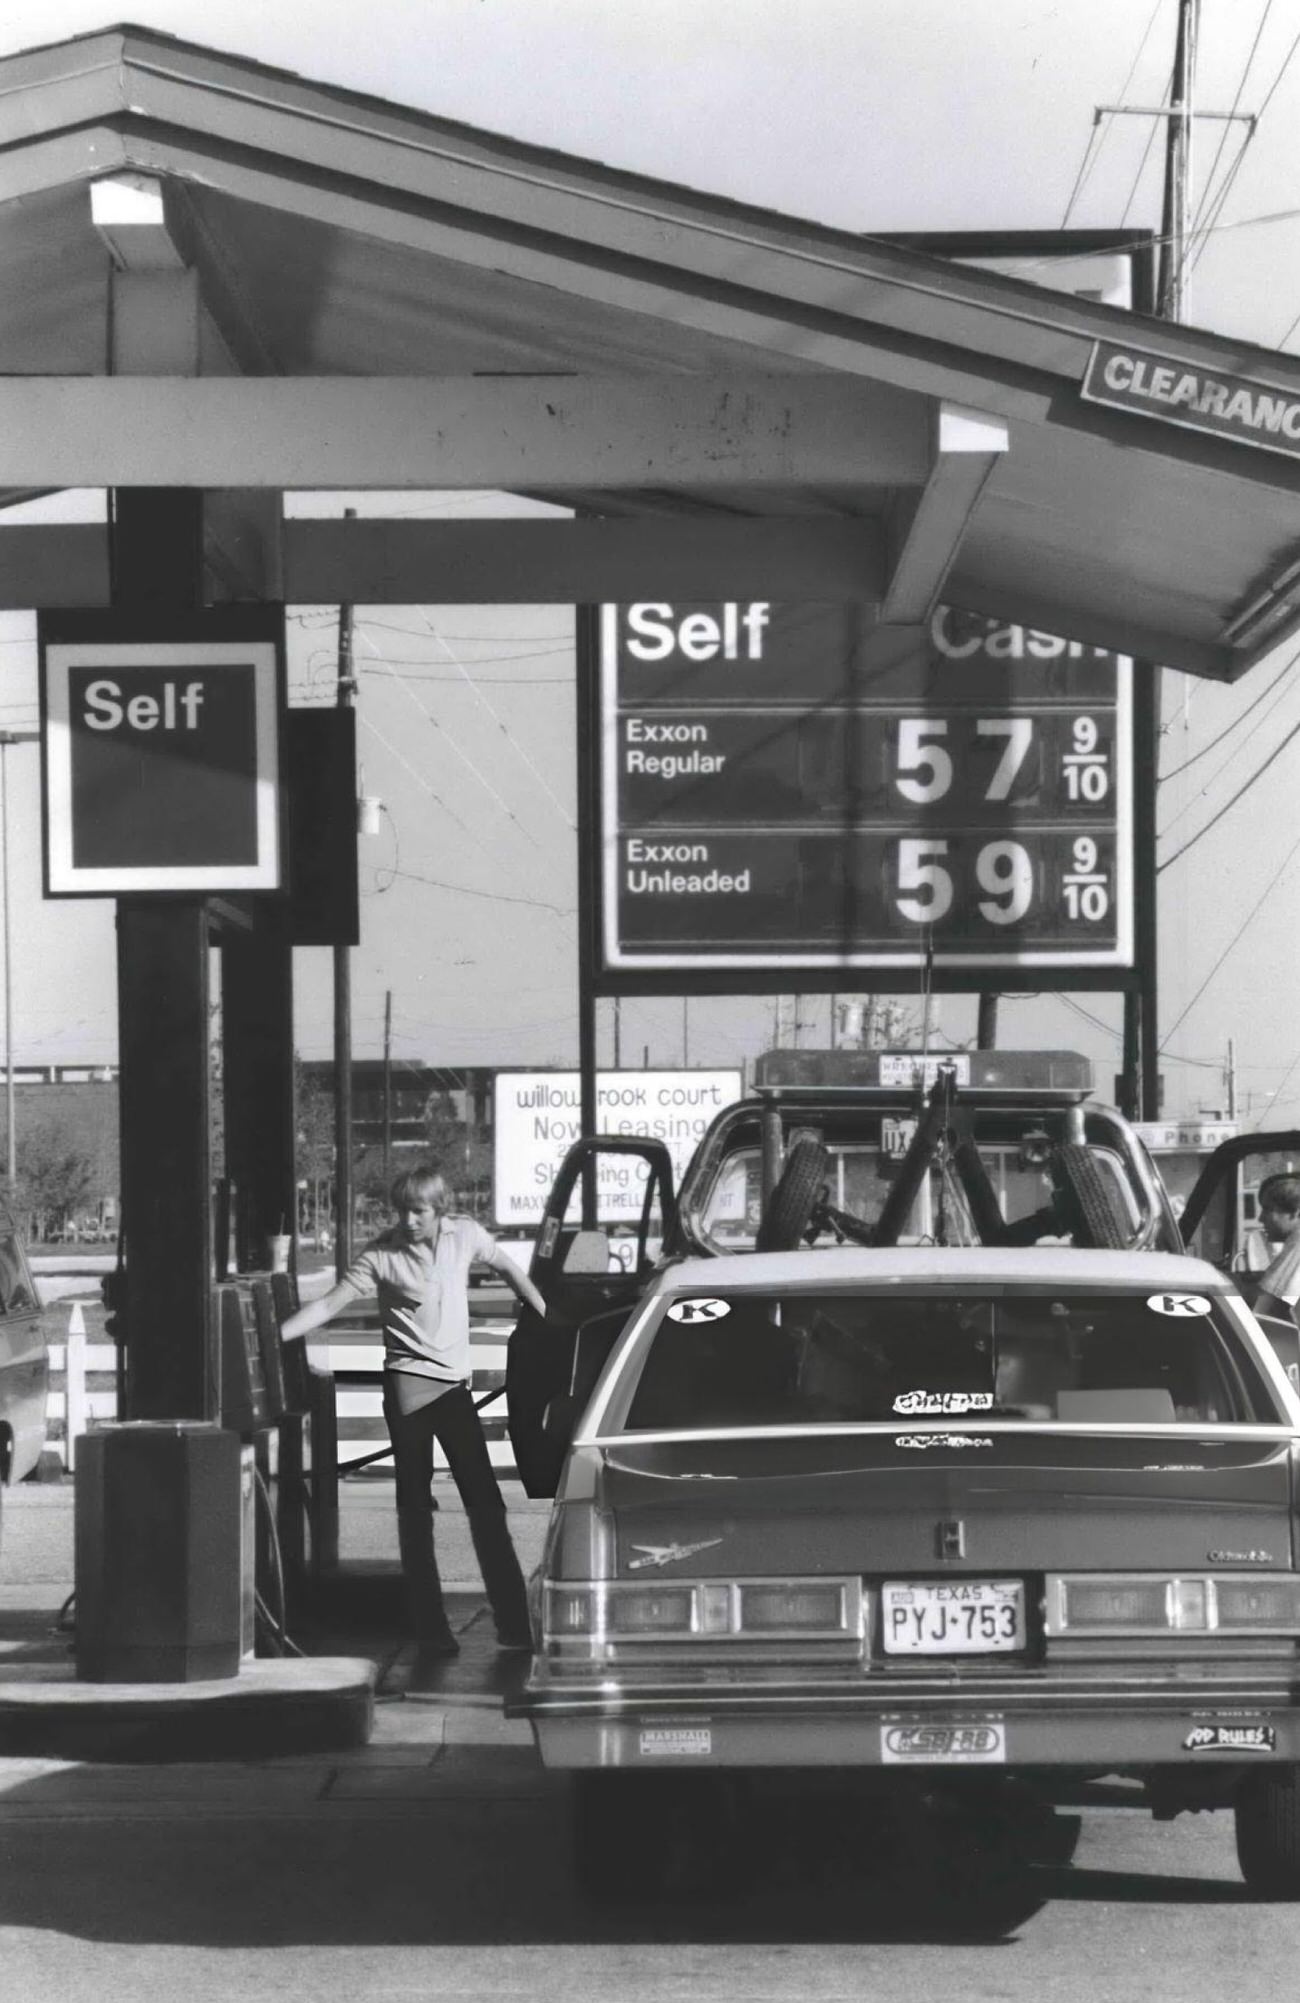 Low gasoline prices at an Exxon station at Hwy 149 and 1960, Houston, Texas, 1980s